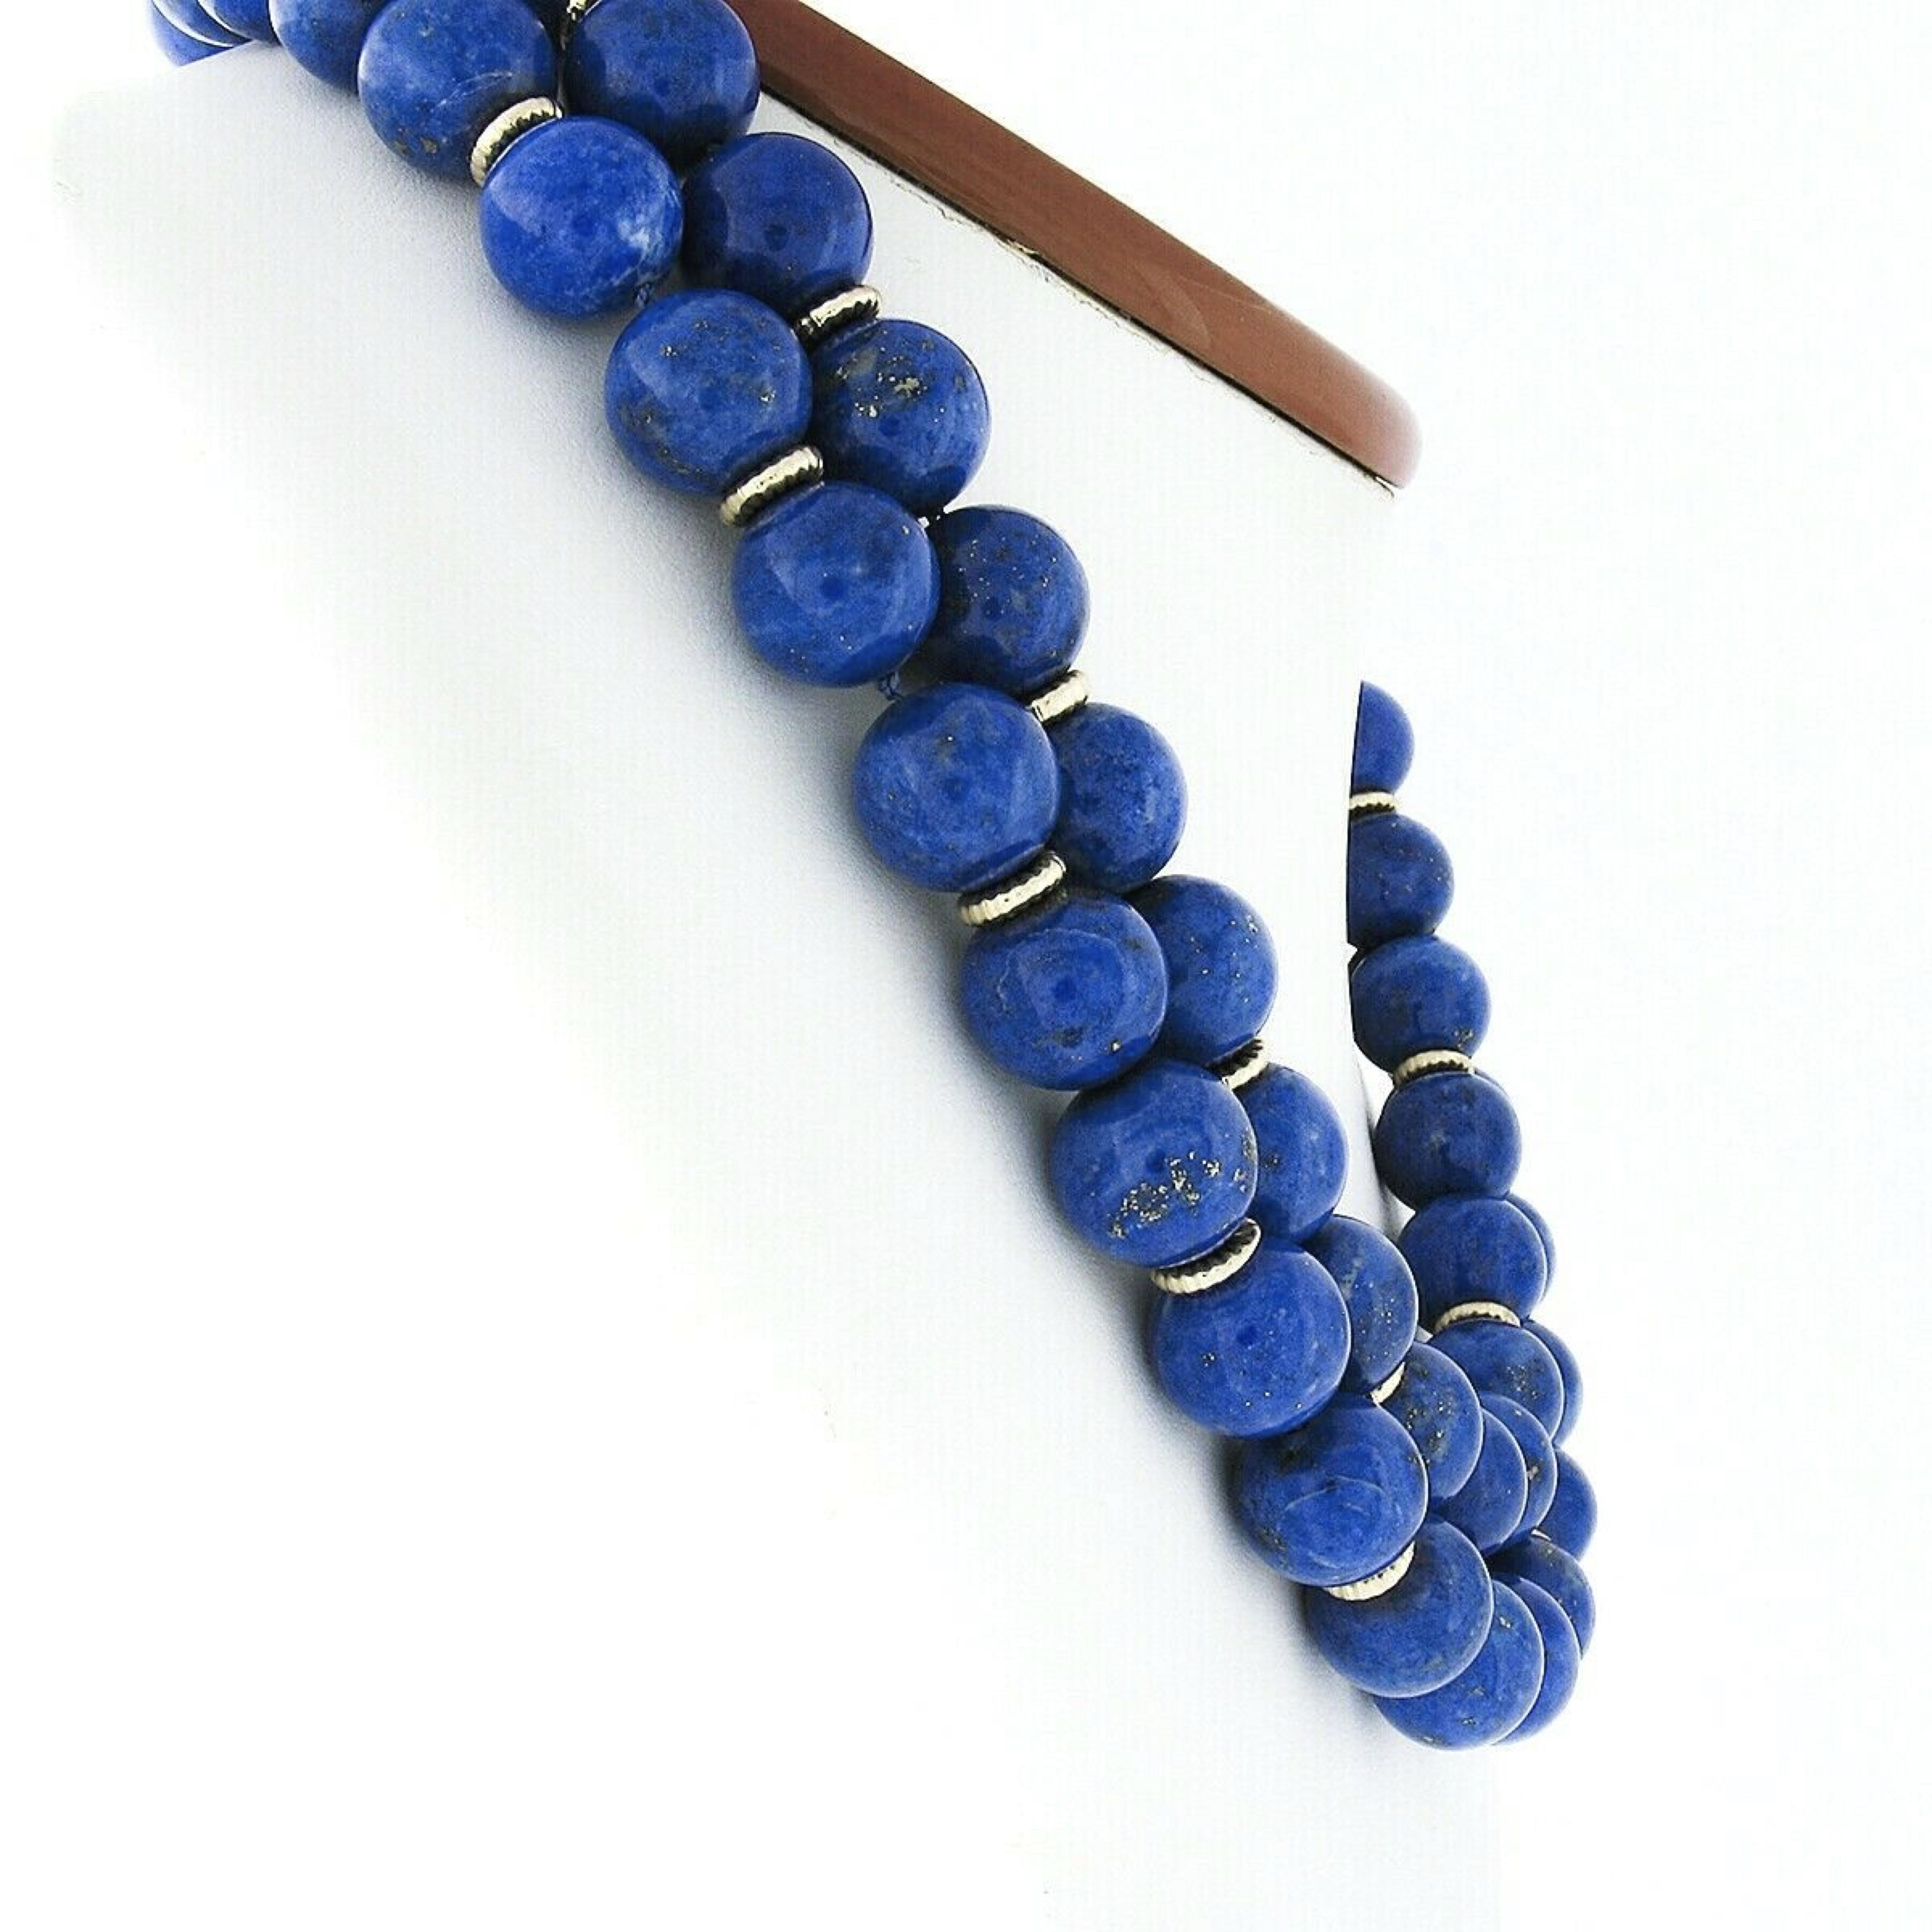 This gorgeous vintage dual strand statement necklace features 63 genuine lapis lazuli beads that are neatly strung throughout both strands alternating with solid 14k yellow gold textured spacers. The fine lapis are GIA certified (2 were randomly